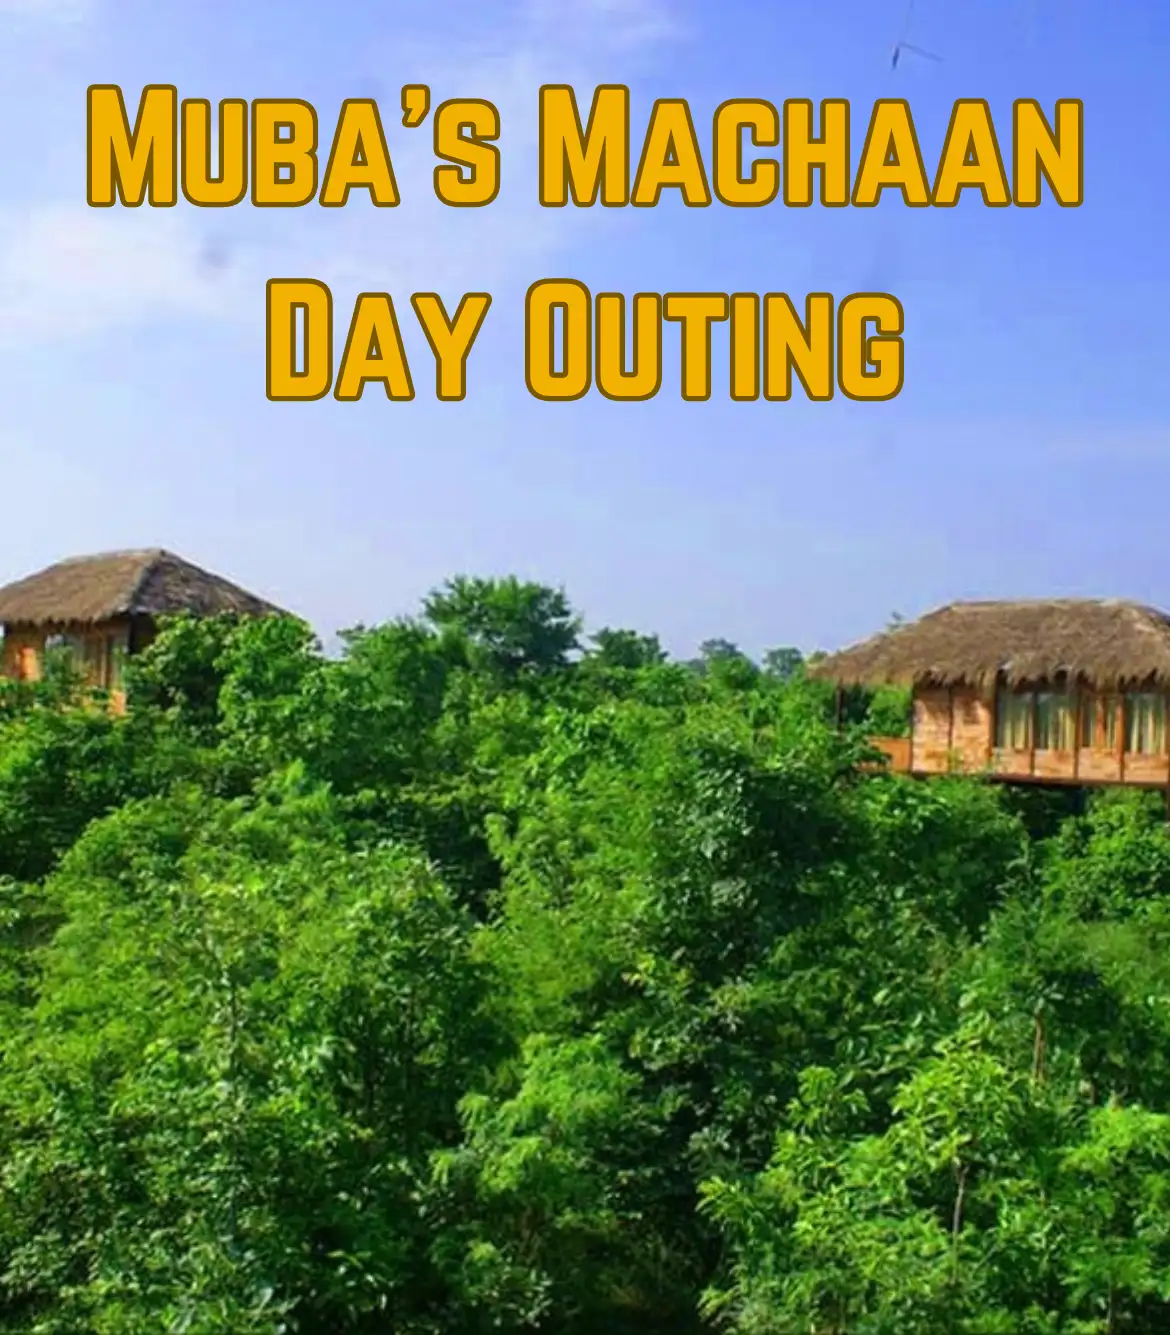 Muba's Machaan Day Outing